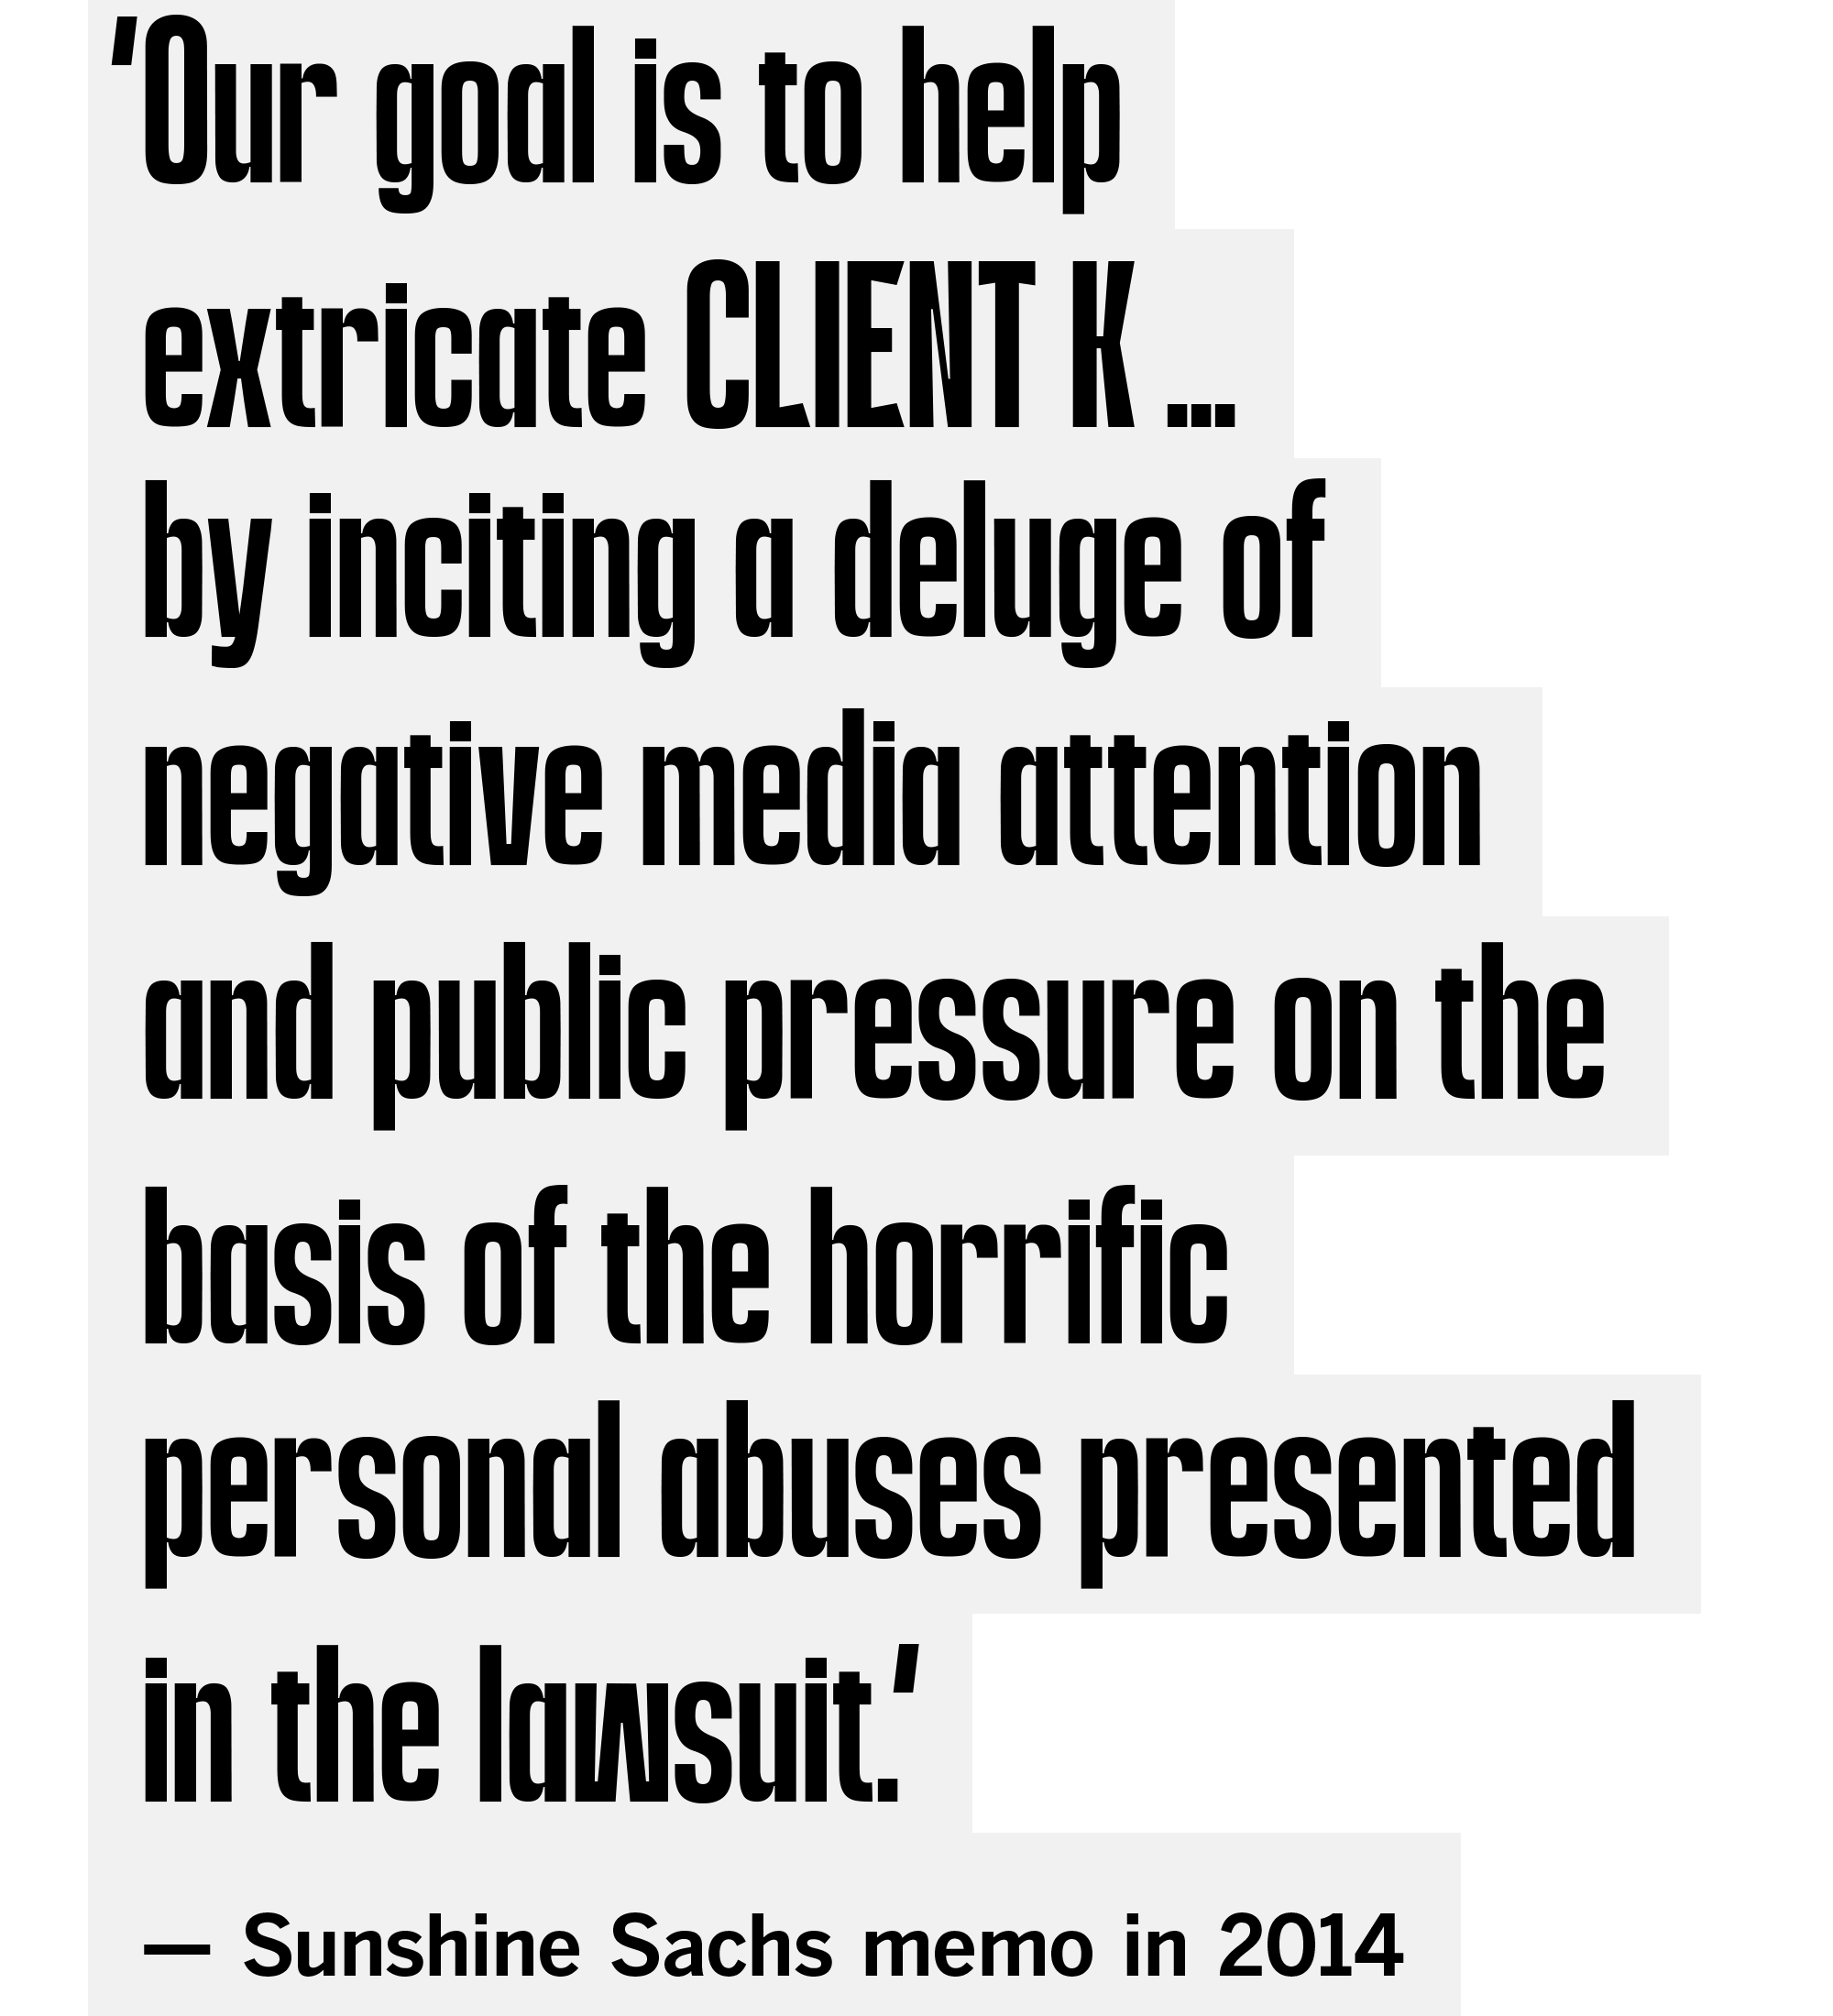 ‘Our goal is to [incite] a deluge of negative media attention ... on the basis of horrific personal abuses.’ Sunshine Sachs